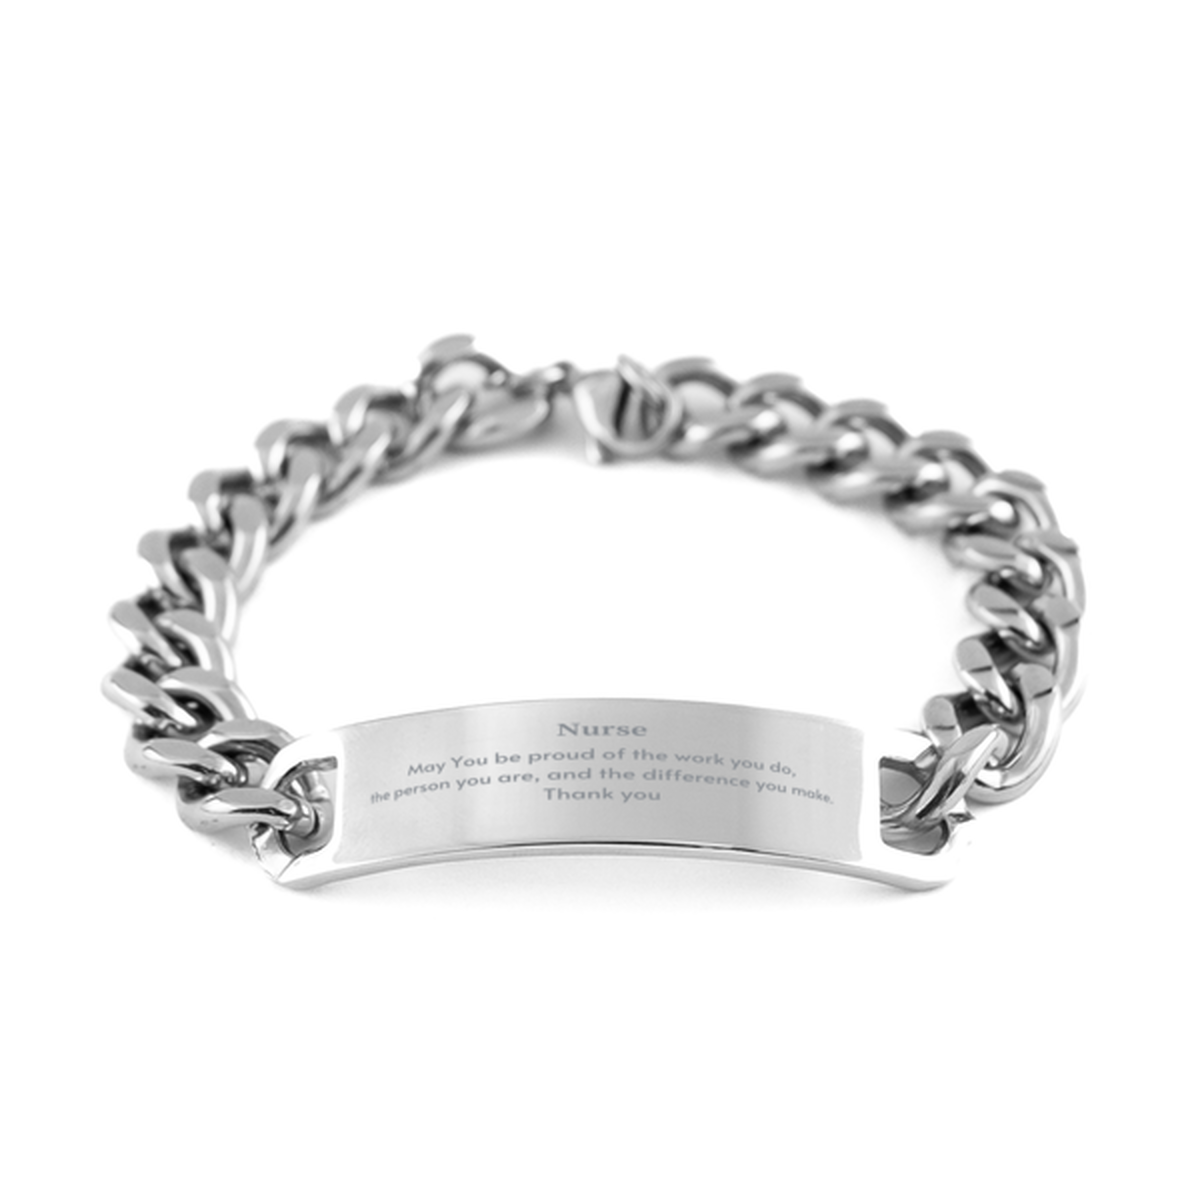 Heartwarming Cuban Chain Stainless Steel Bracelet Retirement Coworkers Gifts for Nurse, Nurse May You be proud of the work you do, the person you are Gifts for Boss Men Women Friends